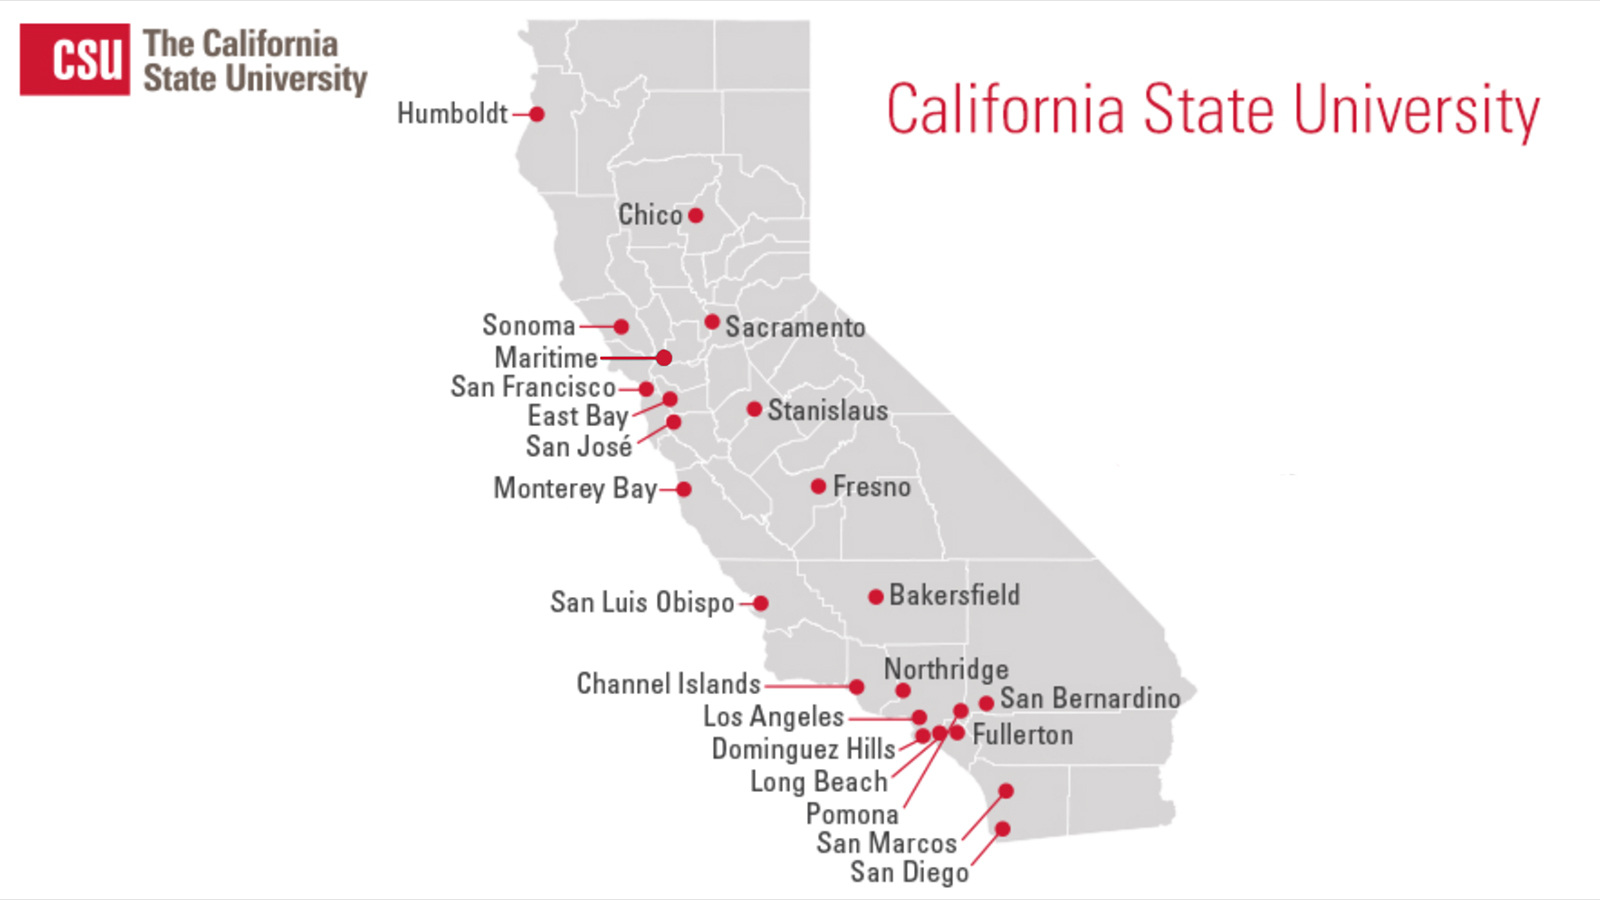 The 23 campuses of the California State University system, the largest four-year public university system in the nation. Graphic courtesy of CSU